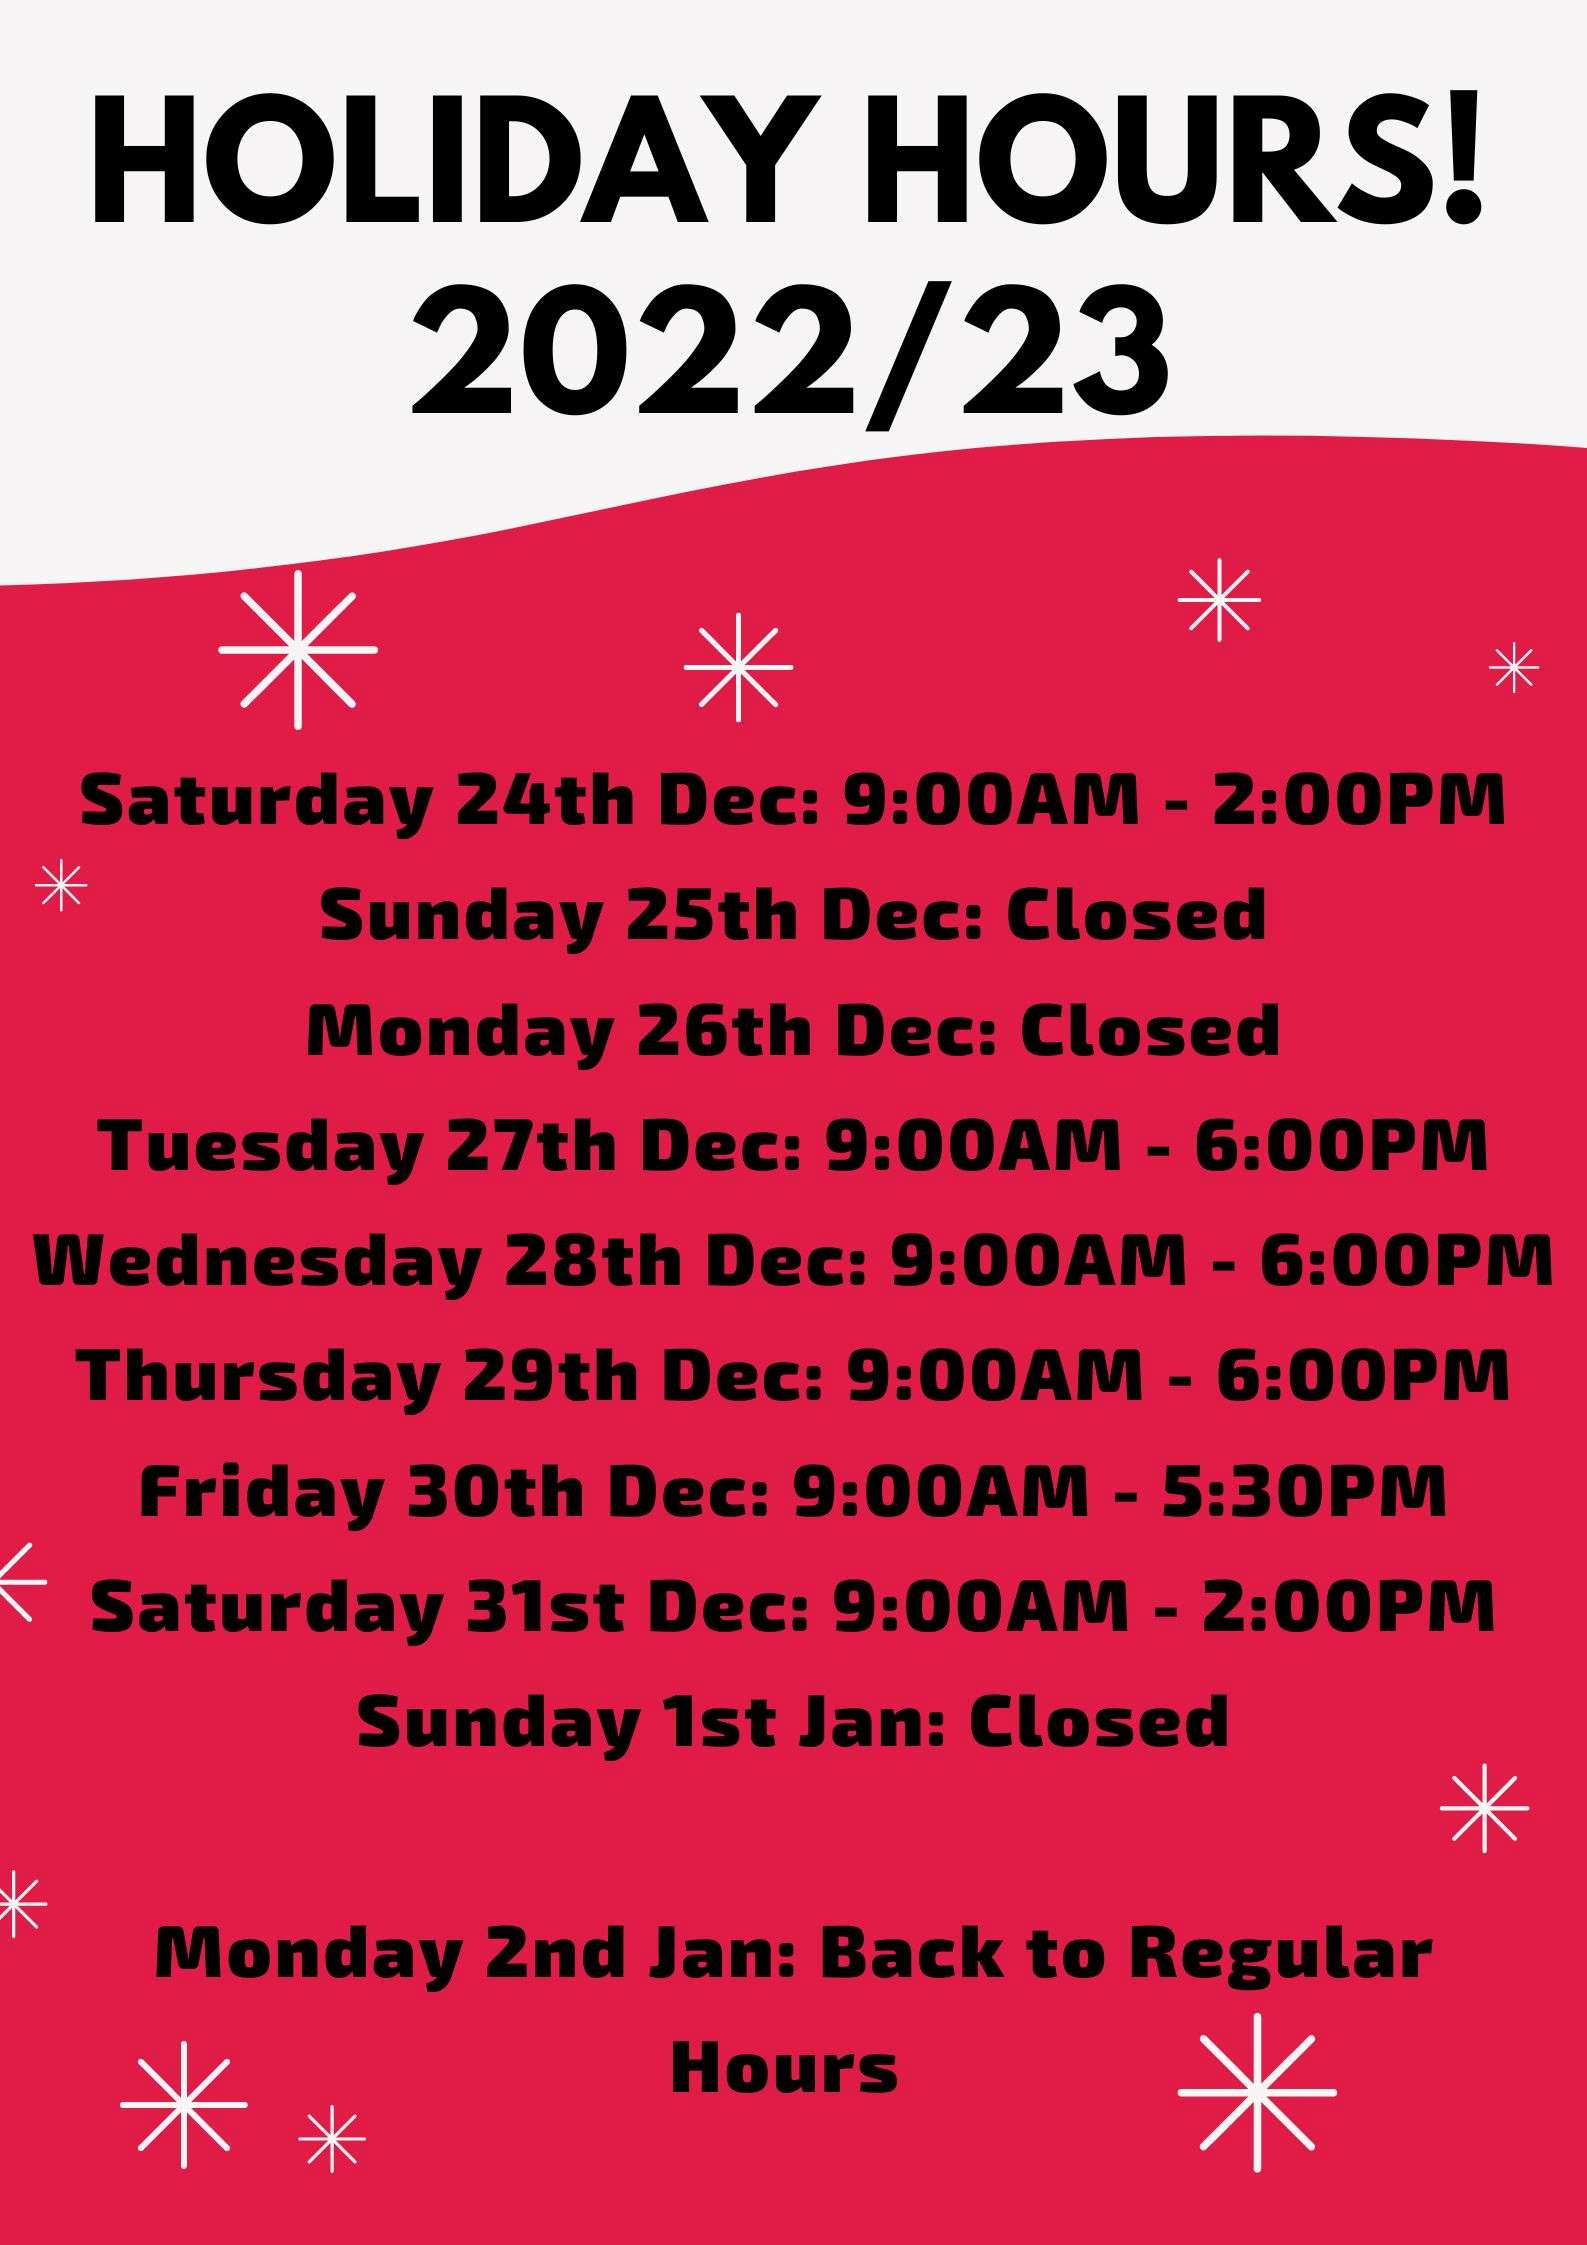 Saturday 24th Dec: 9:00AM - 2:00PM Sunday 25th Dec: Closed Monday 26th Dec: Closed Tuesday 27th Dec: 9:00AM - 6:00PM Wednesday 28th Dec: 9:00AM - 6:00PM Thursday 29th Dec: 9:00AM - 6:00PM Friday 30th Dec: 9:00AM - 5:30PM Saturday 31st Dec: 9:00AM - 2:00PM Sunday 1st Jan: Closed Monday 2nd Jan: Back to Regular Hours 